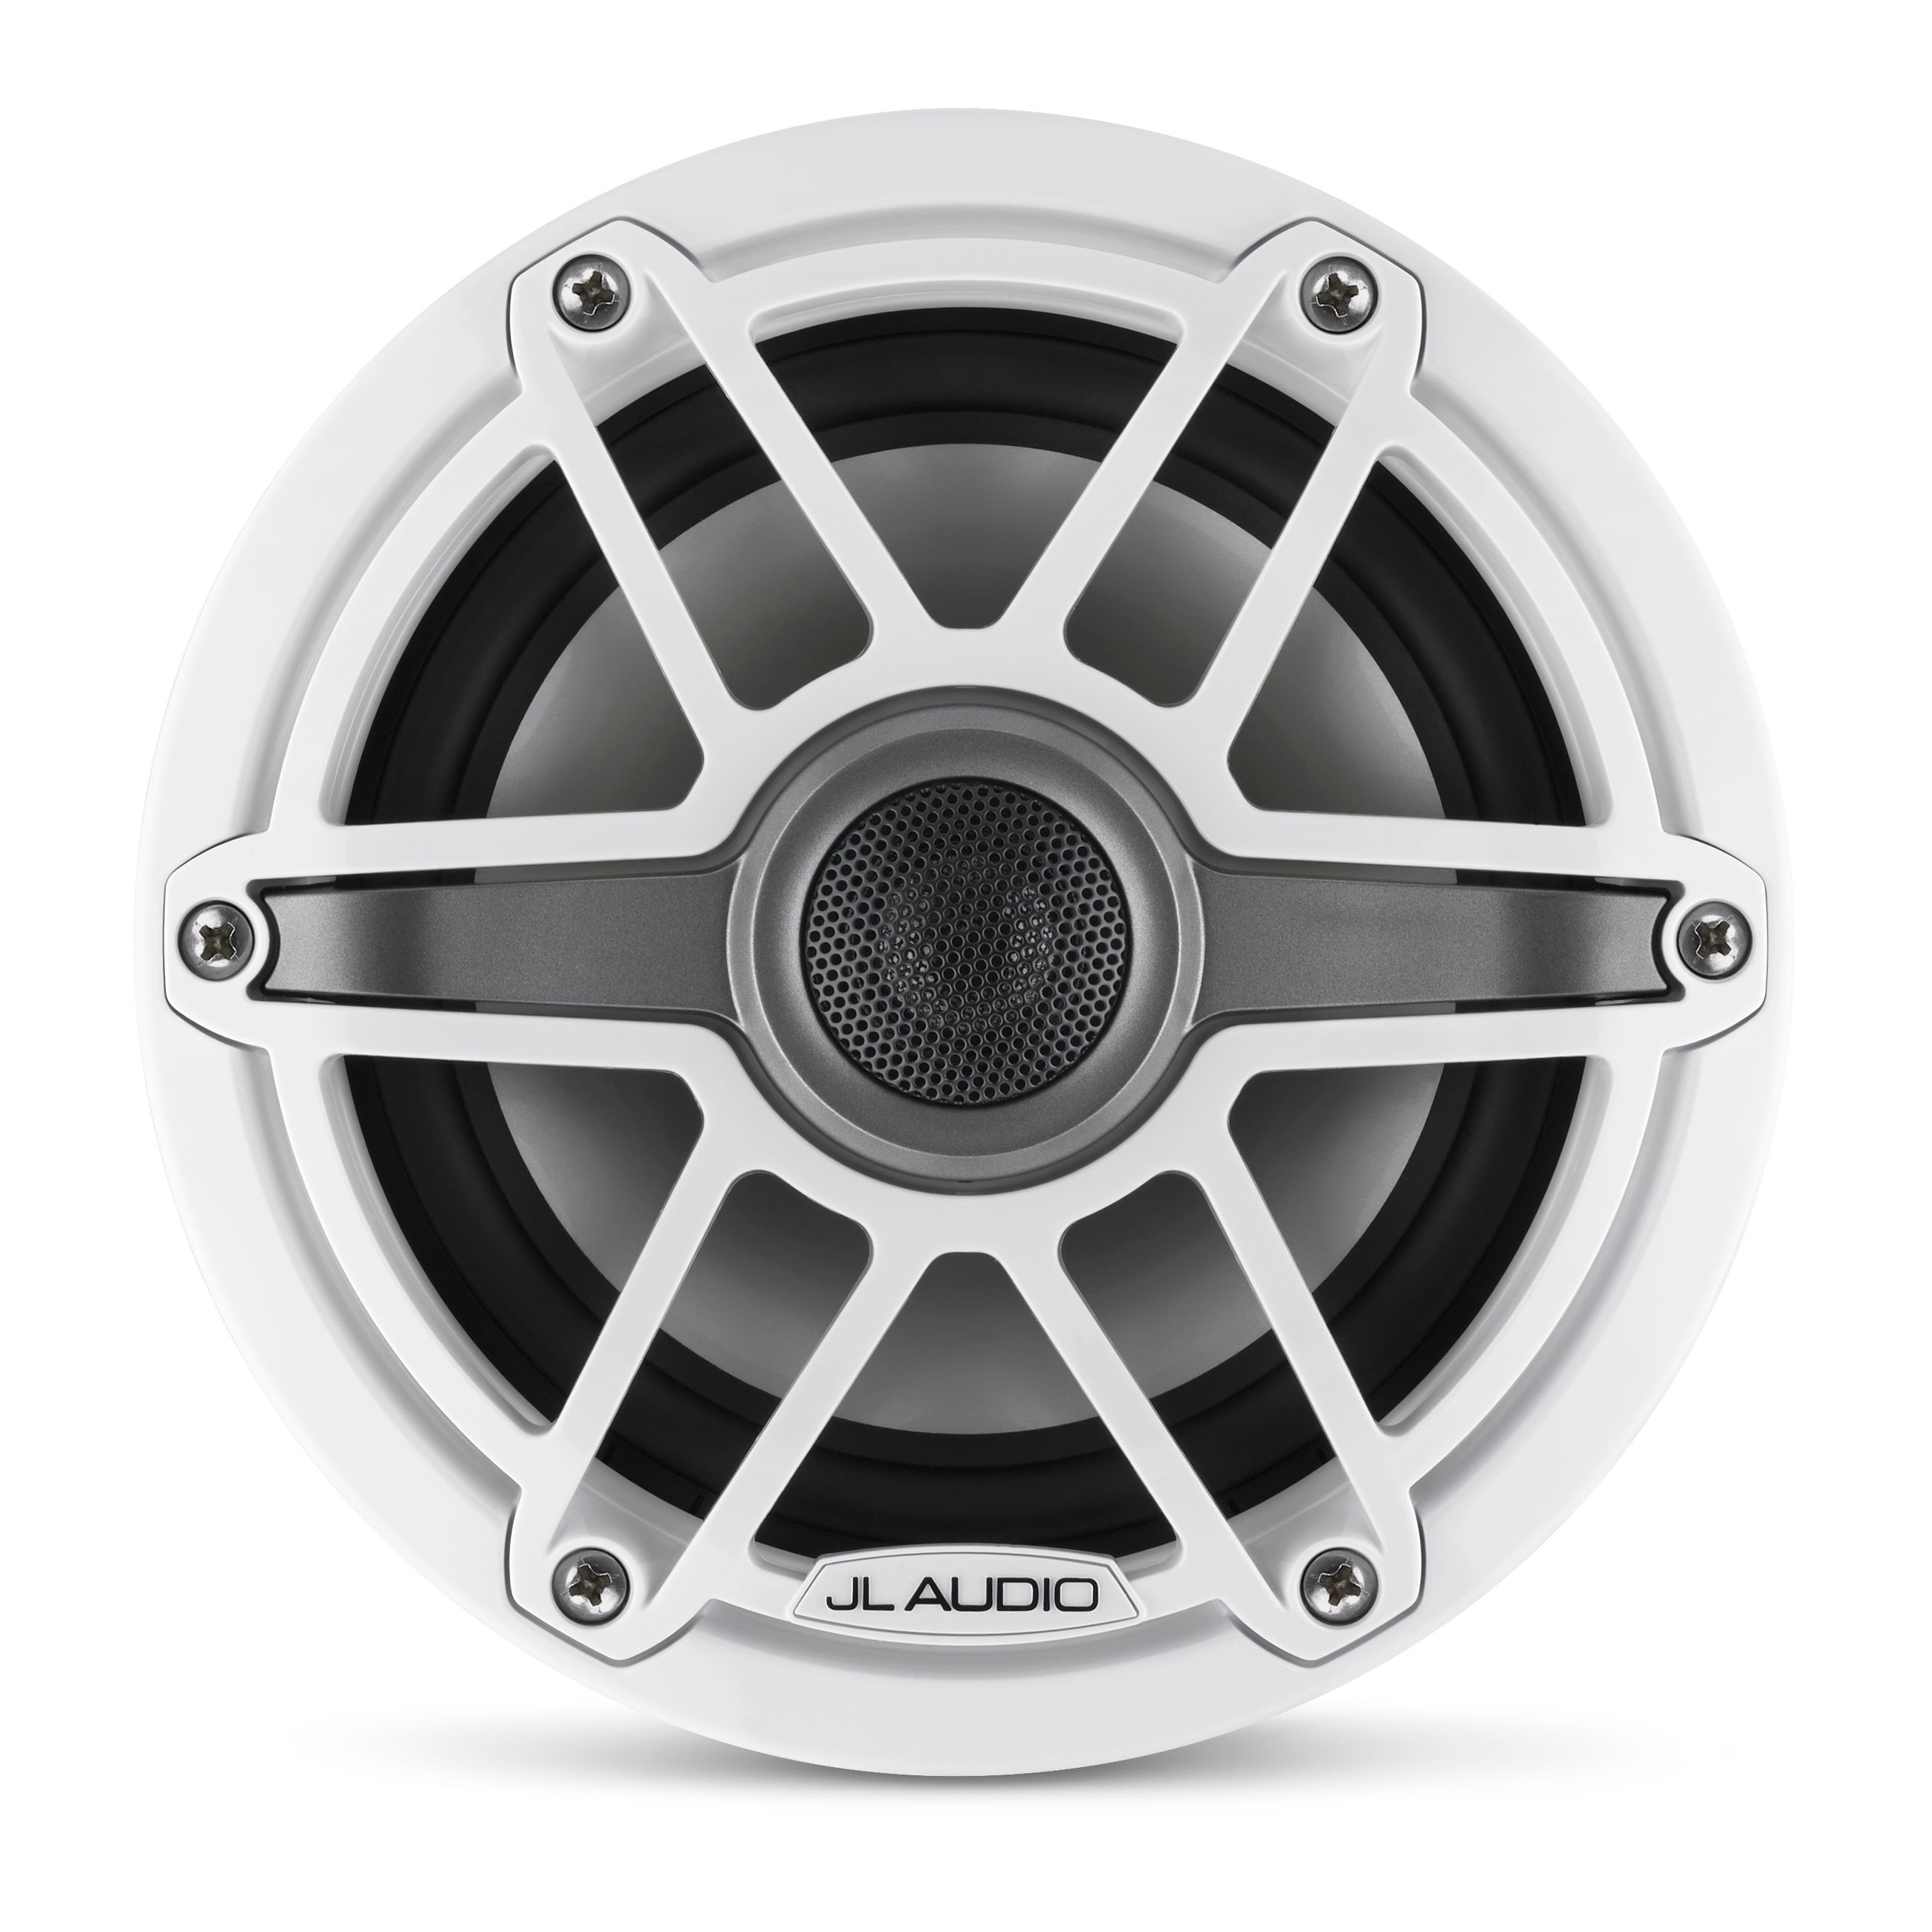 Overview image of a JL Audio M6 speaker in the 6.5 inch version.